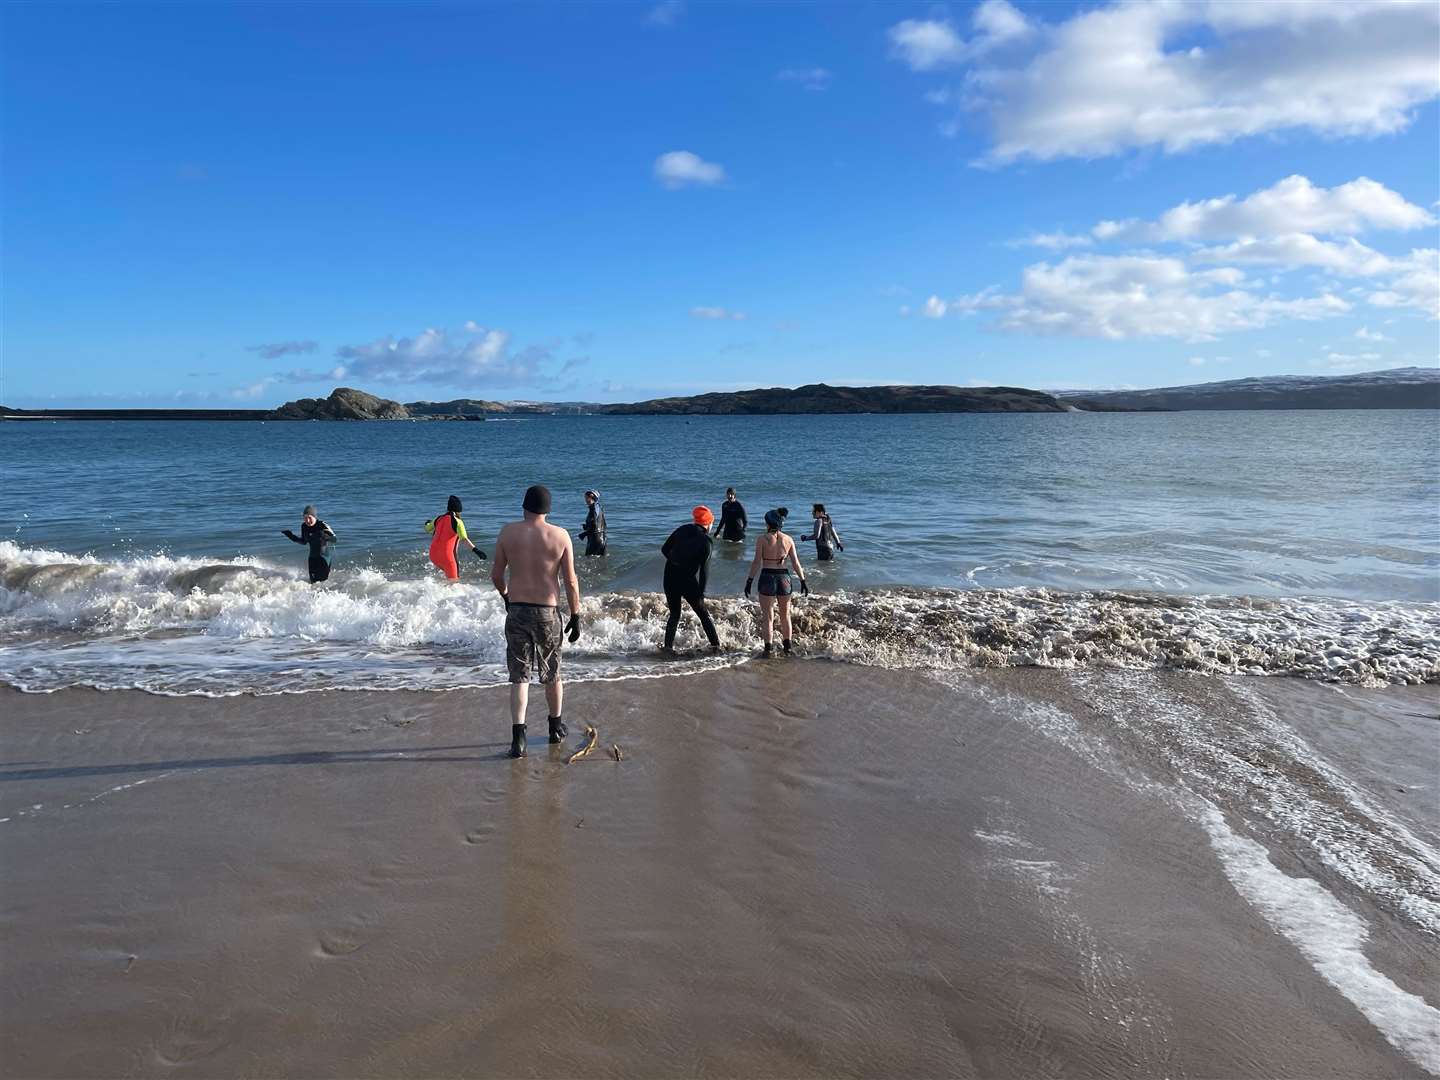 Cold water dipping at Talmine beach last Saturday. Another dip has been organised to take place on Sunday, March 6.